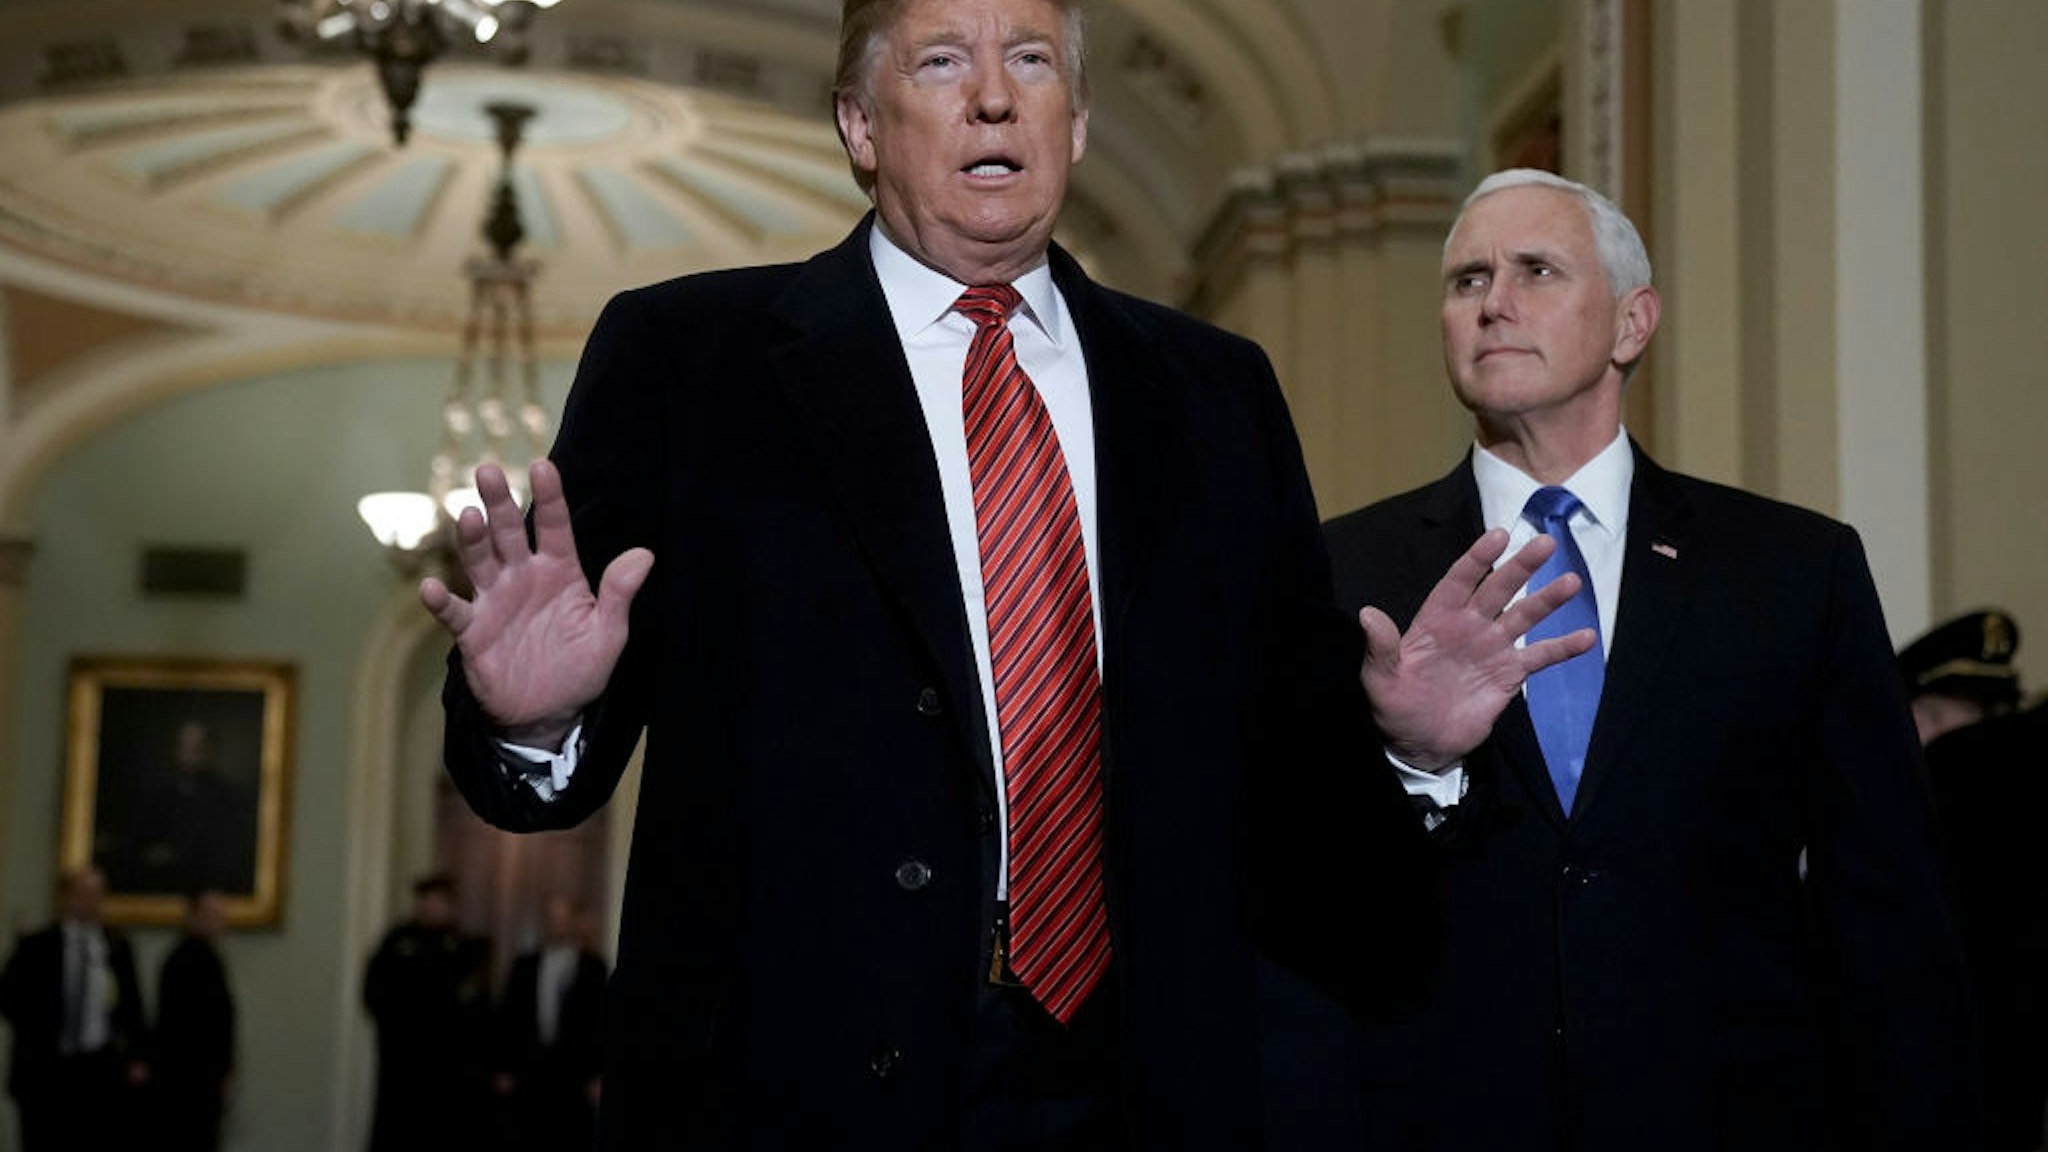 President Donald Trump and Vice President Mike Pence arrive at the U.S. Capitol to attend the weekly Republican Senate policy luncheon